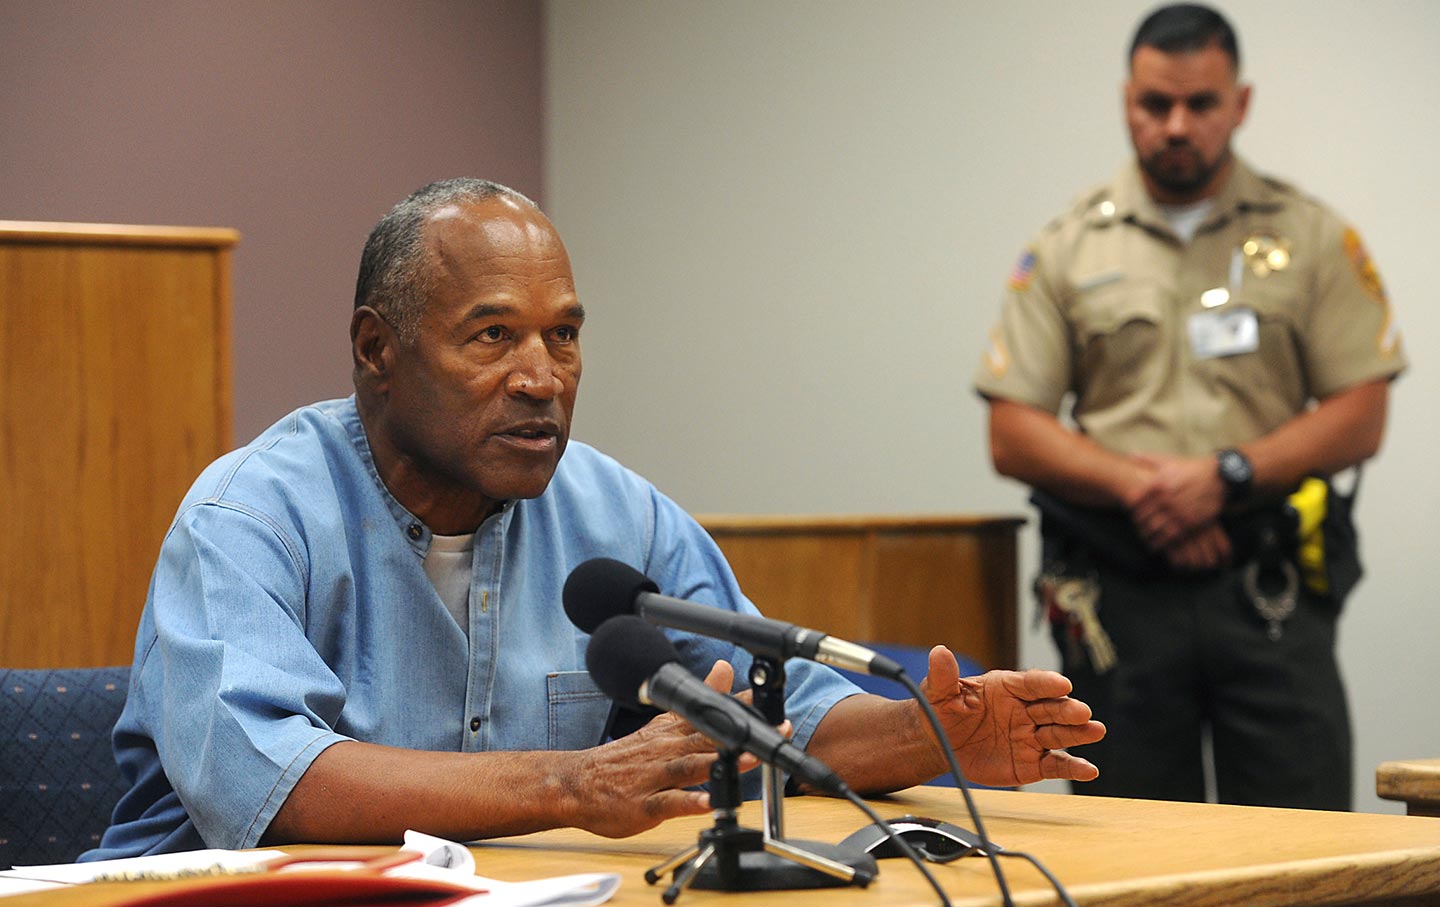 Former NFL football star O.J. Simpson appears for his parole hearing at the Lovelock Correctional Center in Lovelock, Nevada, on Thursday, July 20, 2017.